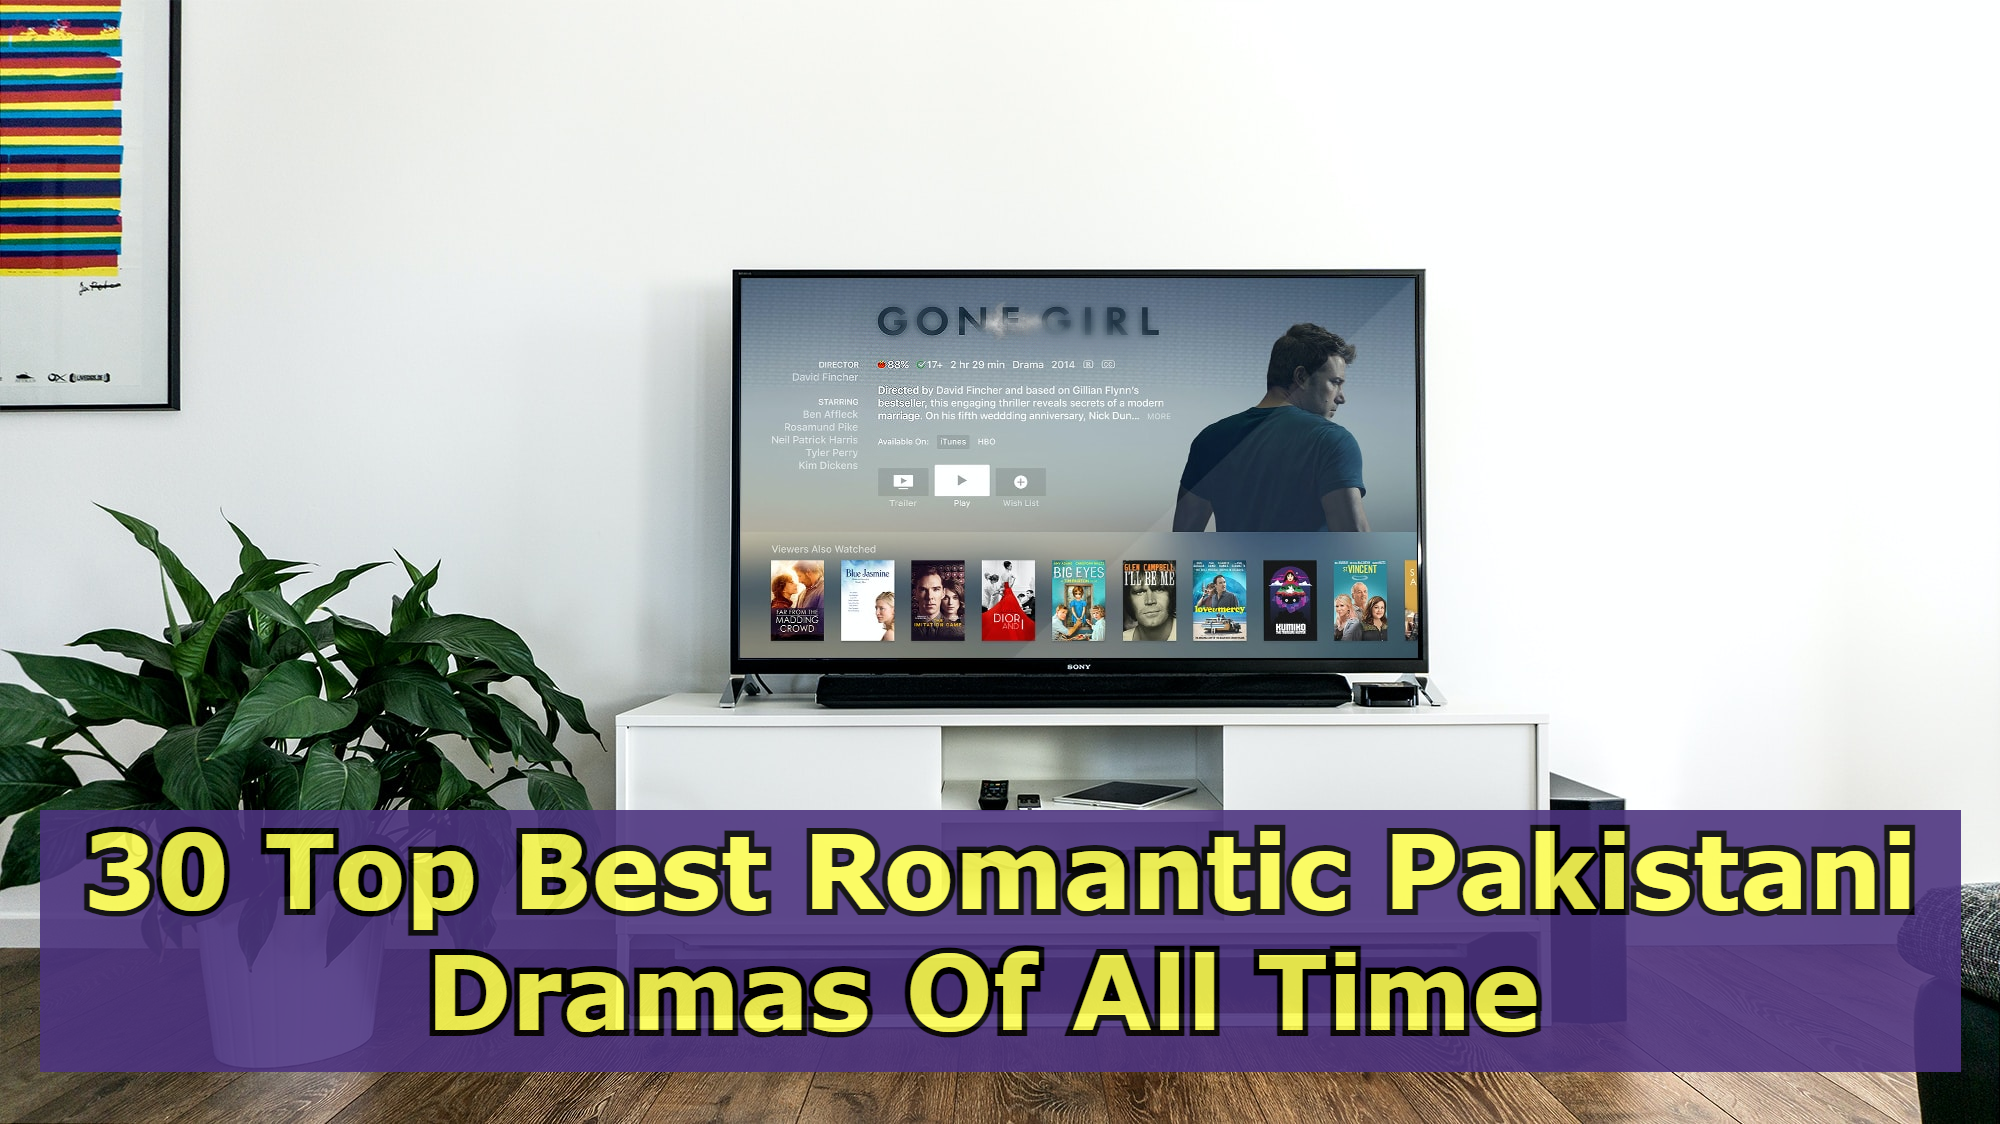 30 Top Best Romantic Pakistani Dramas Of All Time